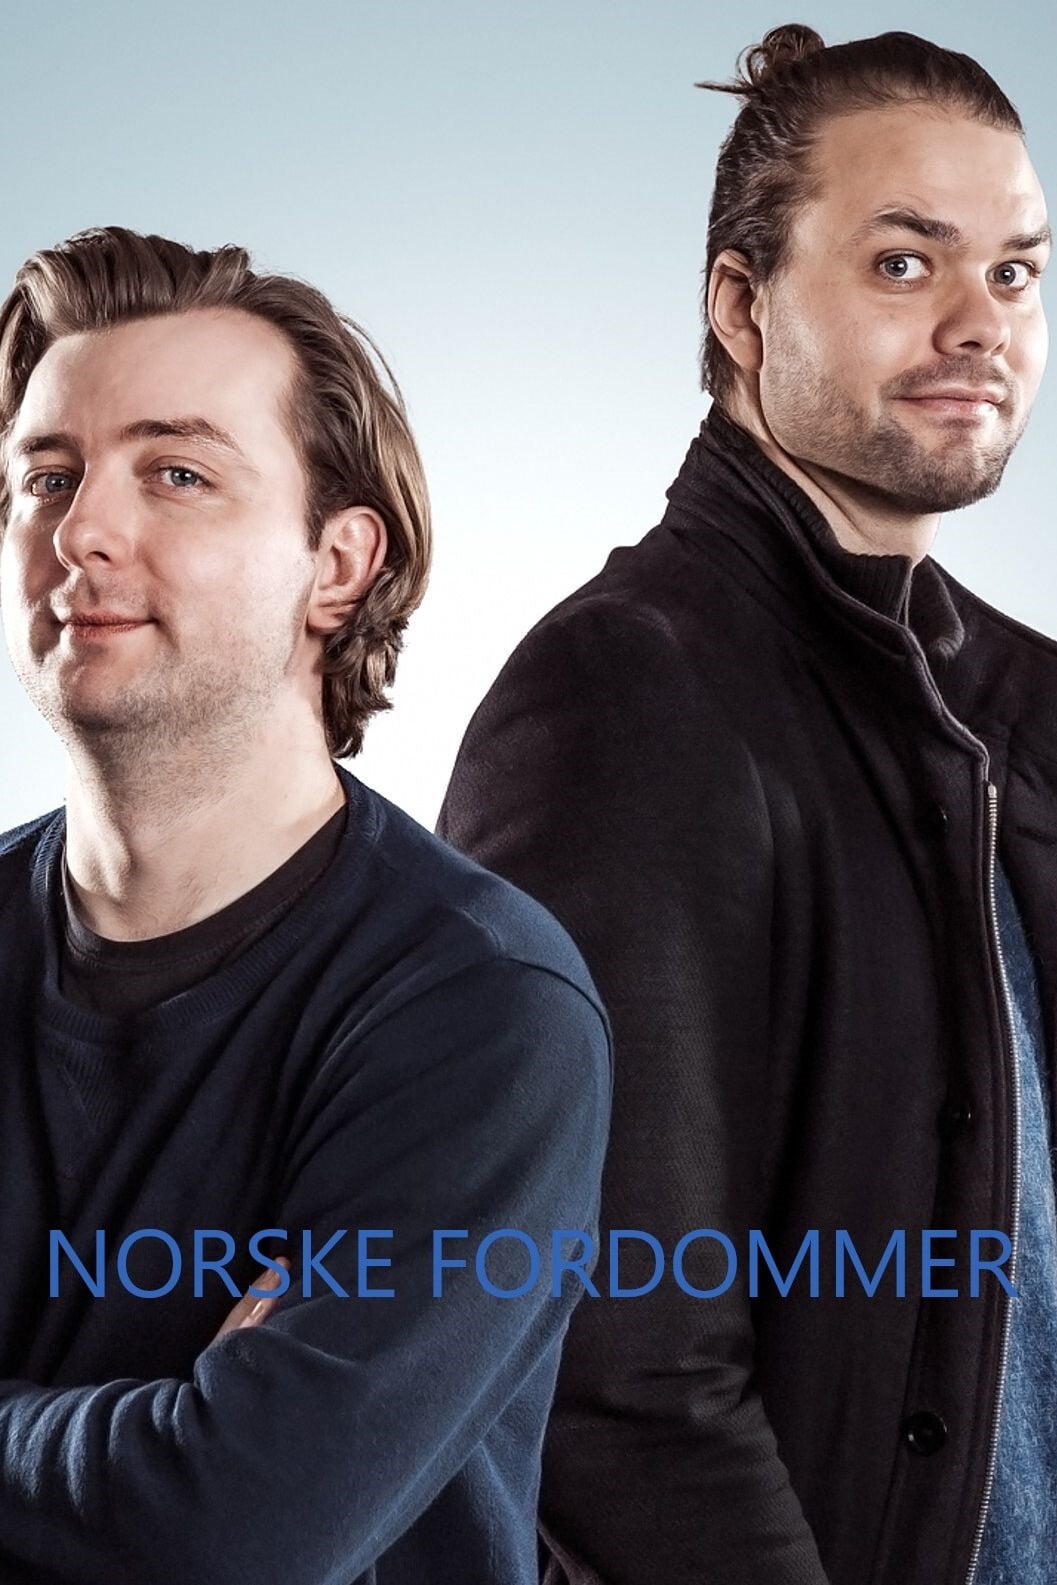 Norske Fordommer TV Shows About Class Differences